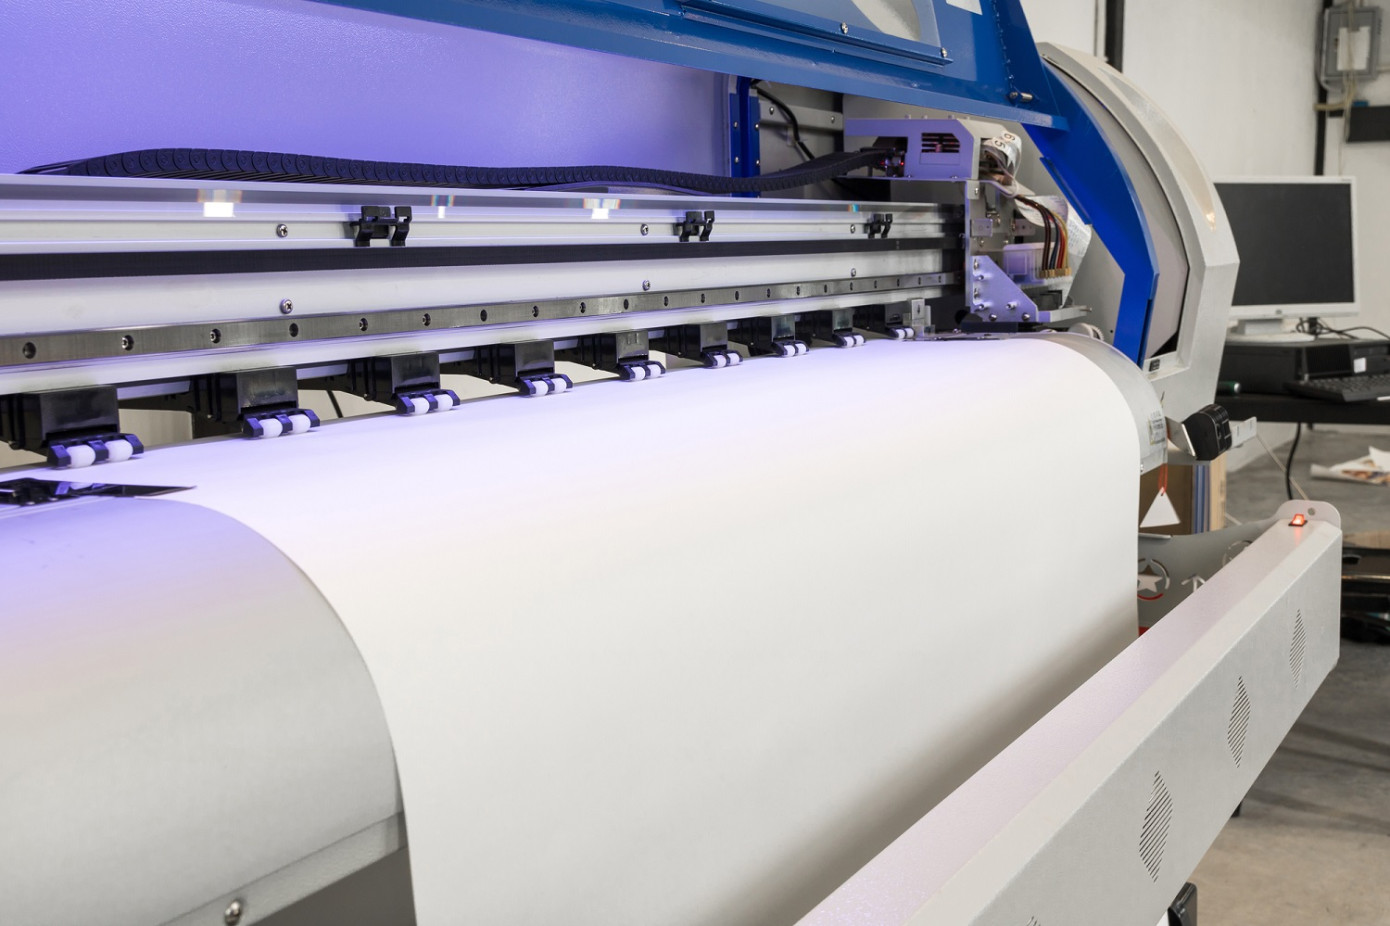 AFRY collaborates with Assocarta for decarbonizing Italian pulp & paper industry